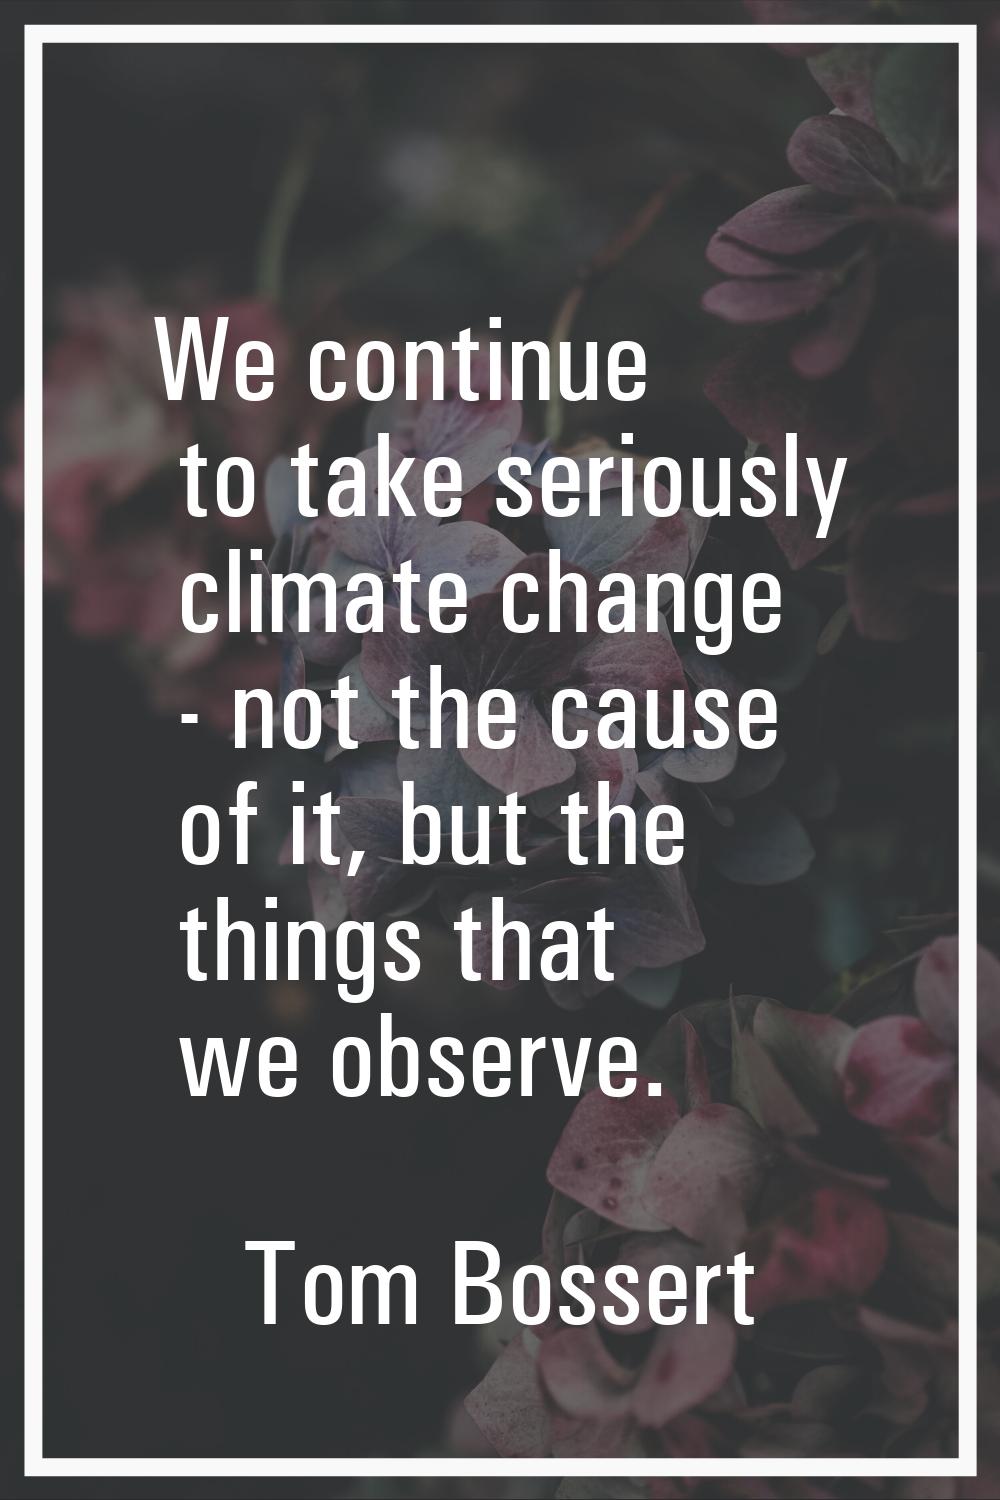 We continue to take seriously climate change - not the cause of it, but the things that we observe.